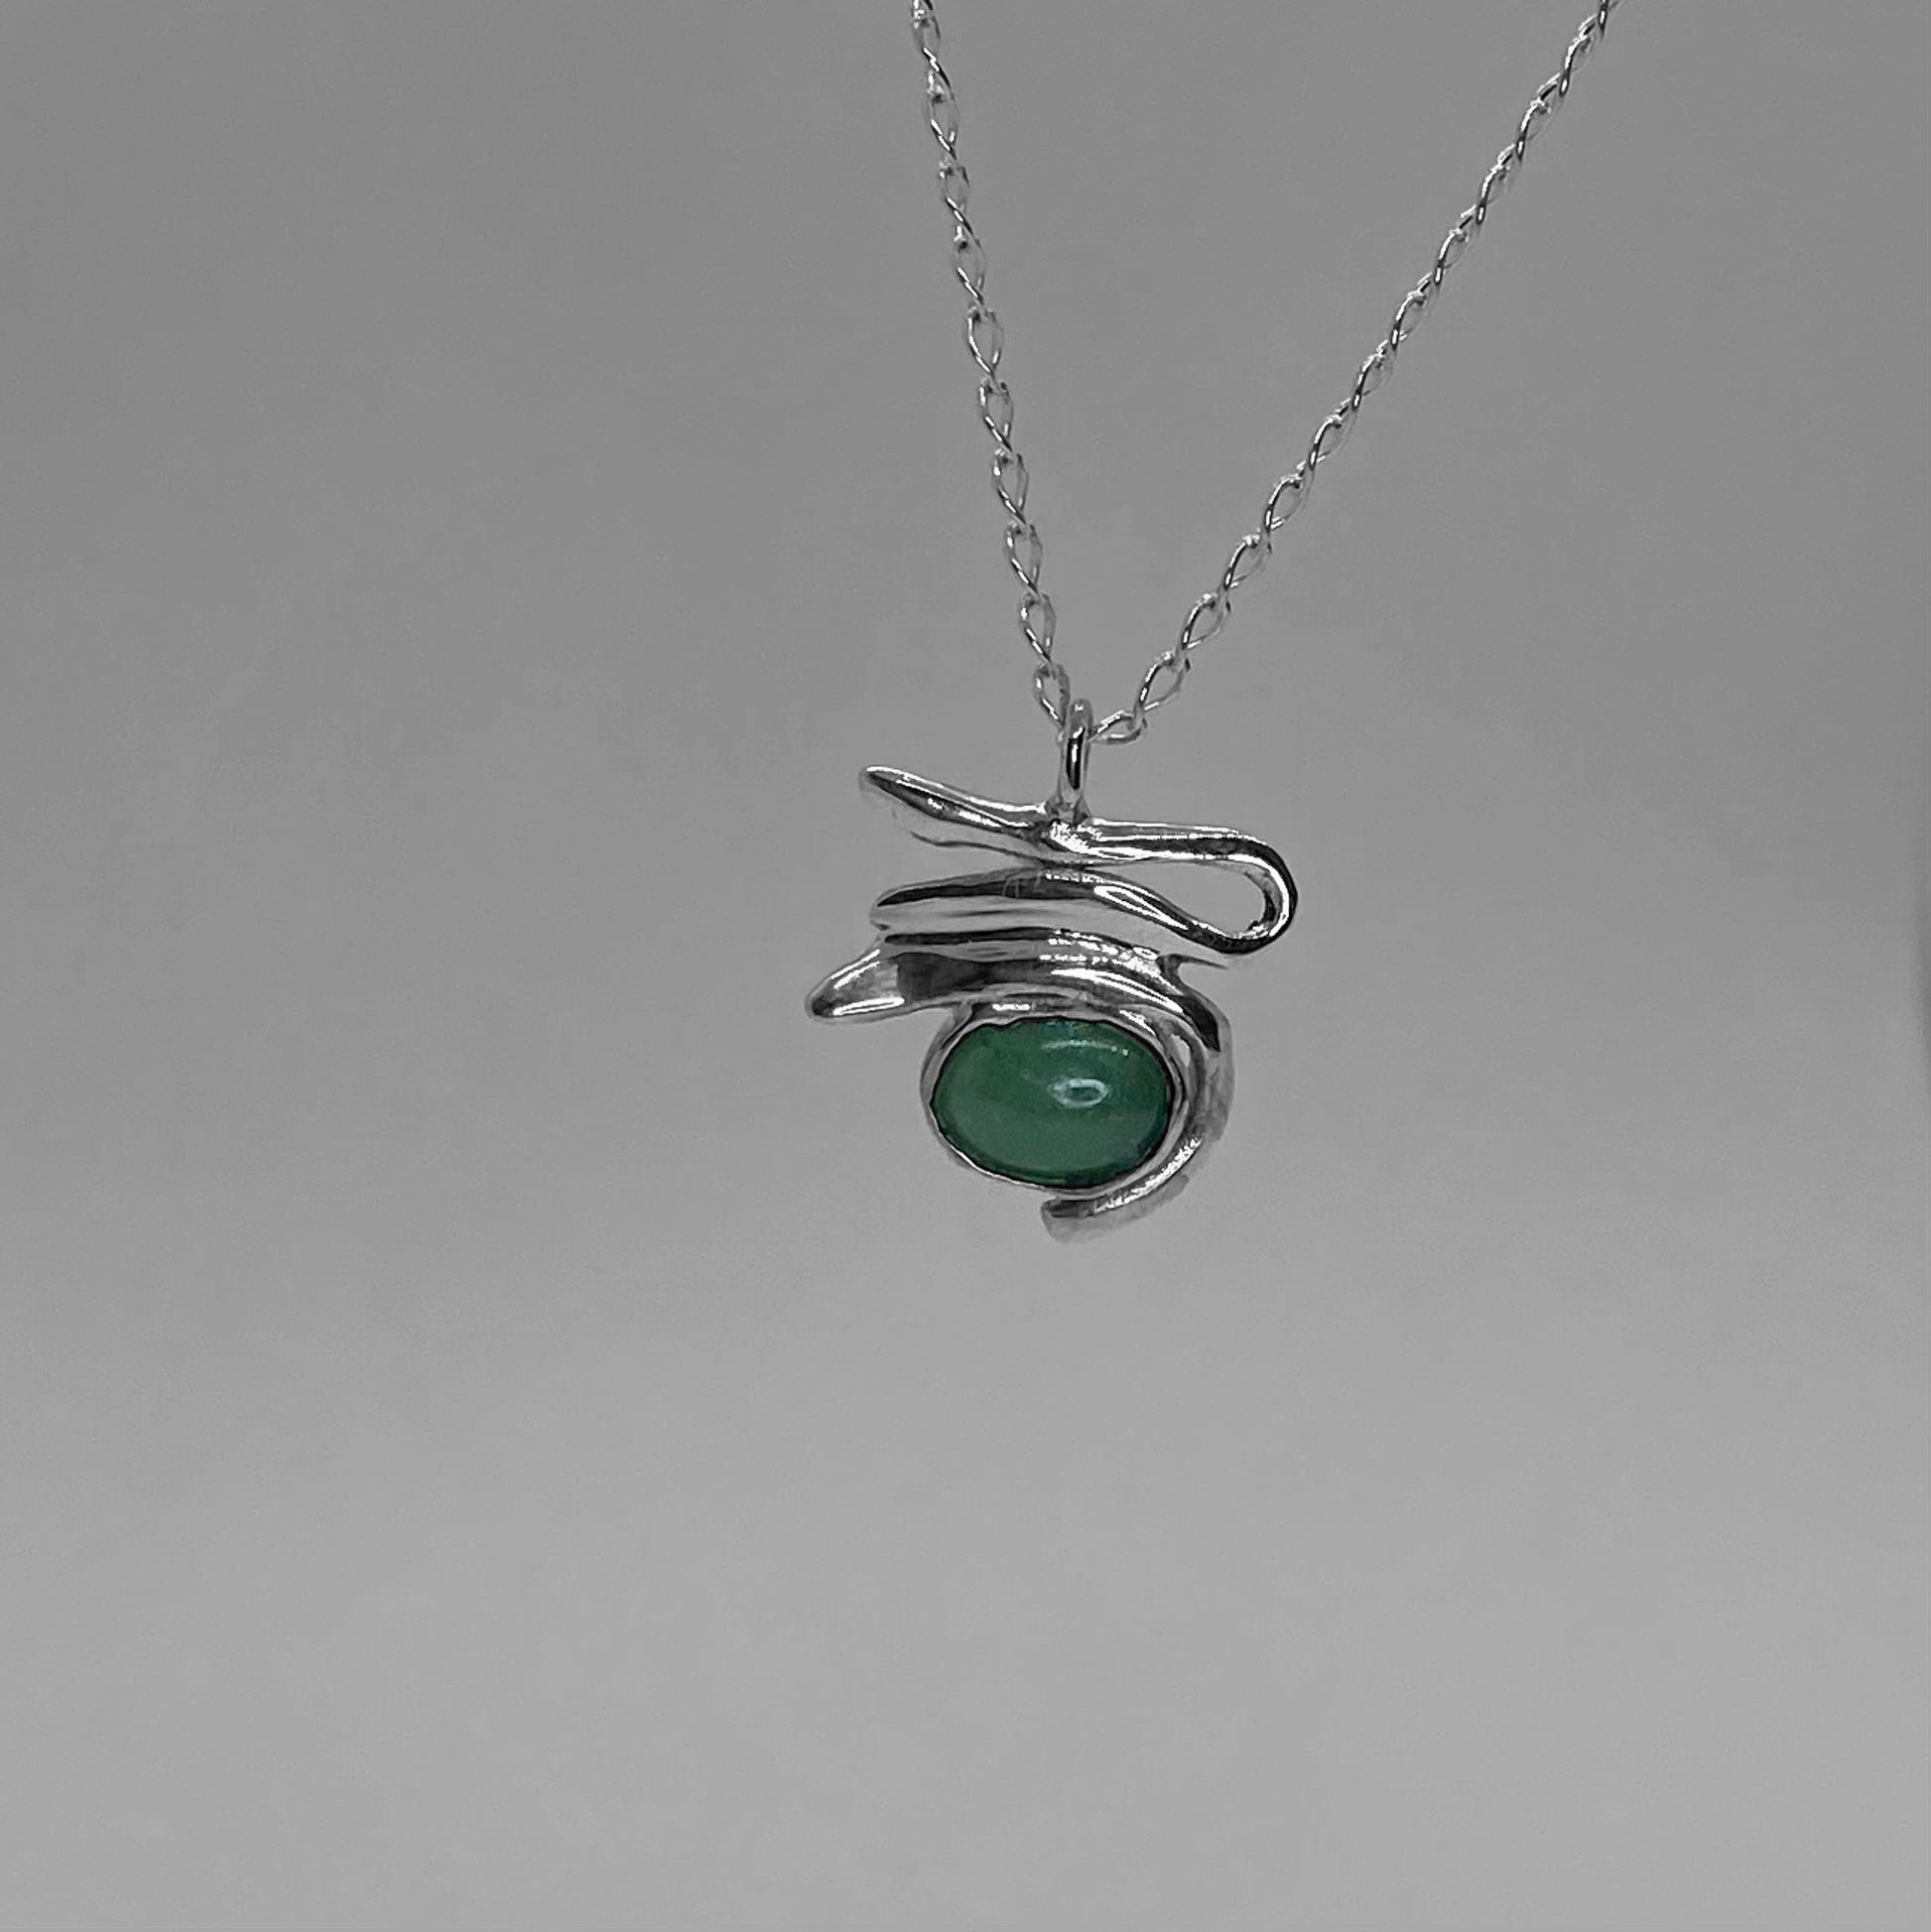 Handmade necklace crafted from sterling silver 925 with a semi-precious stone.